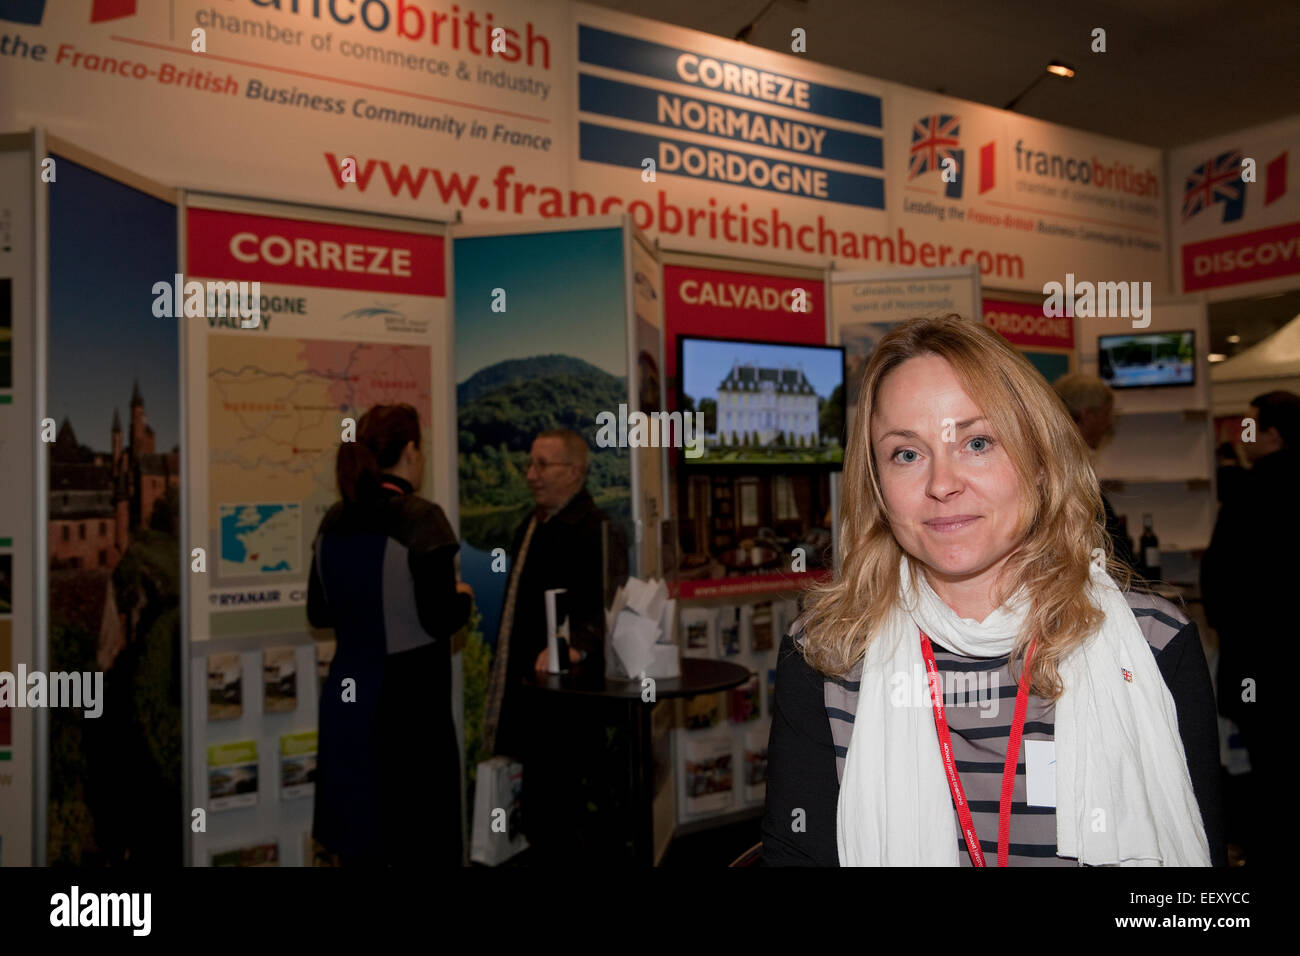 Franco British chamber of commerce and industry at the France Show 2015 in Olympia London Stock Photo